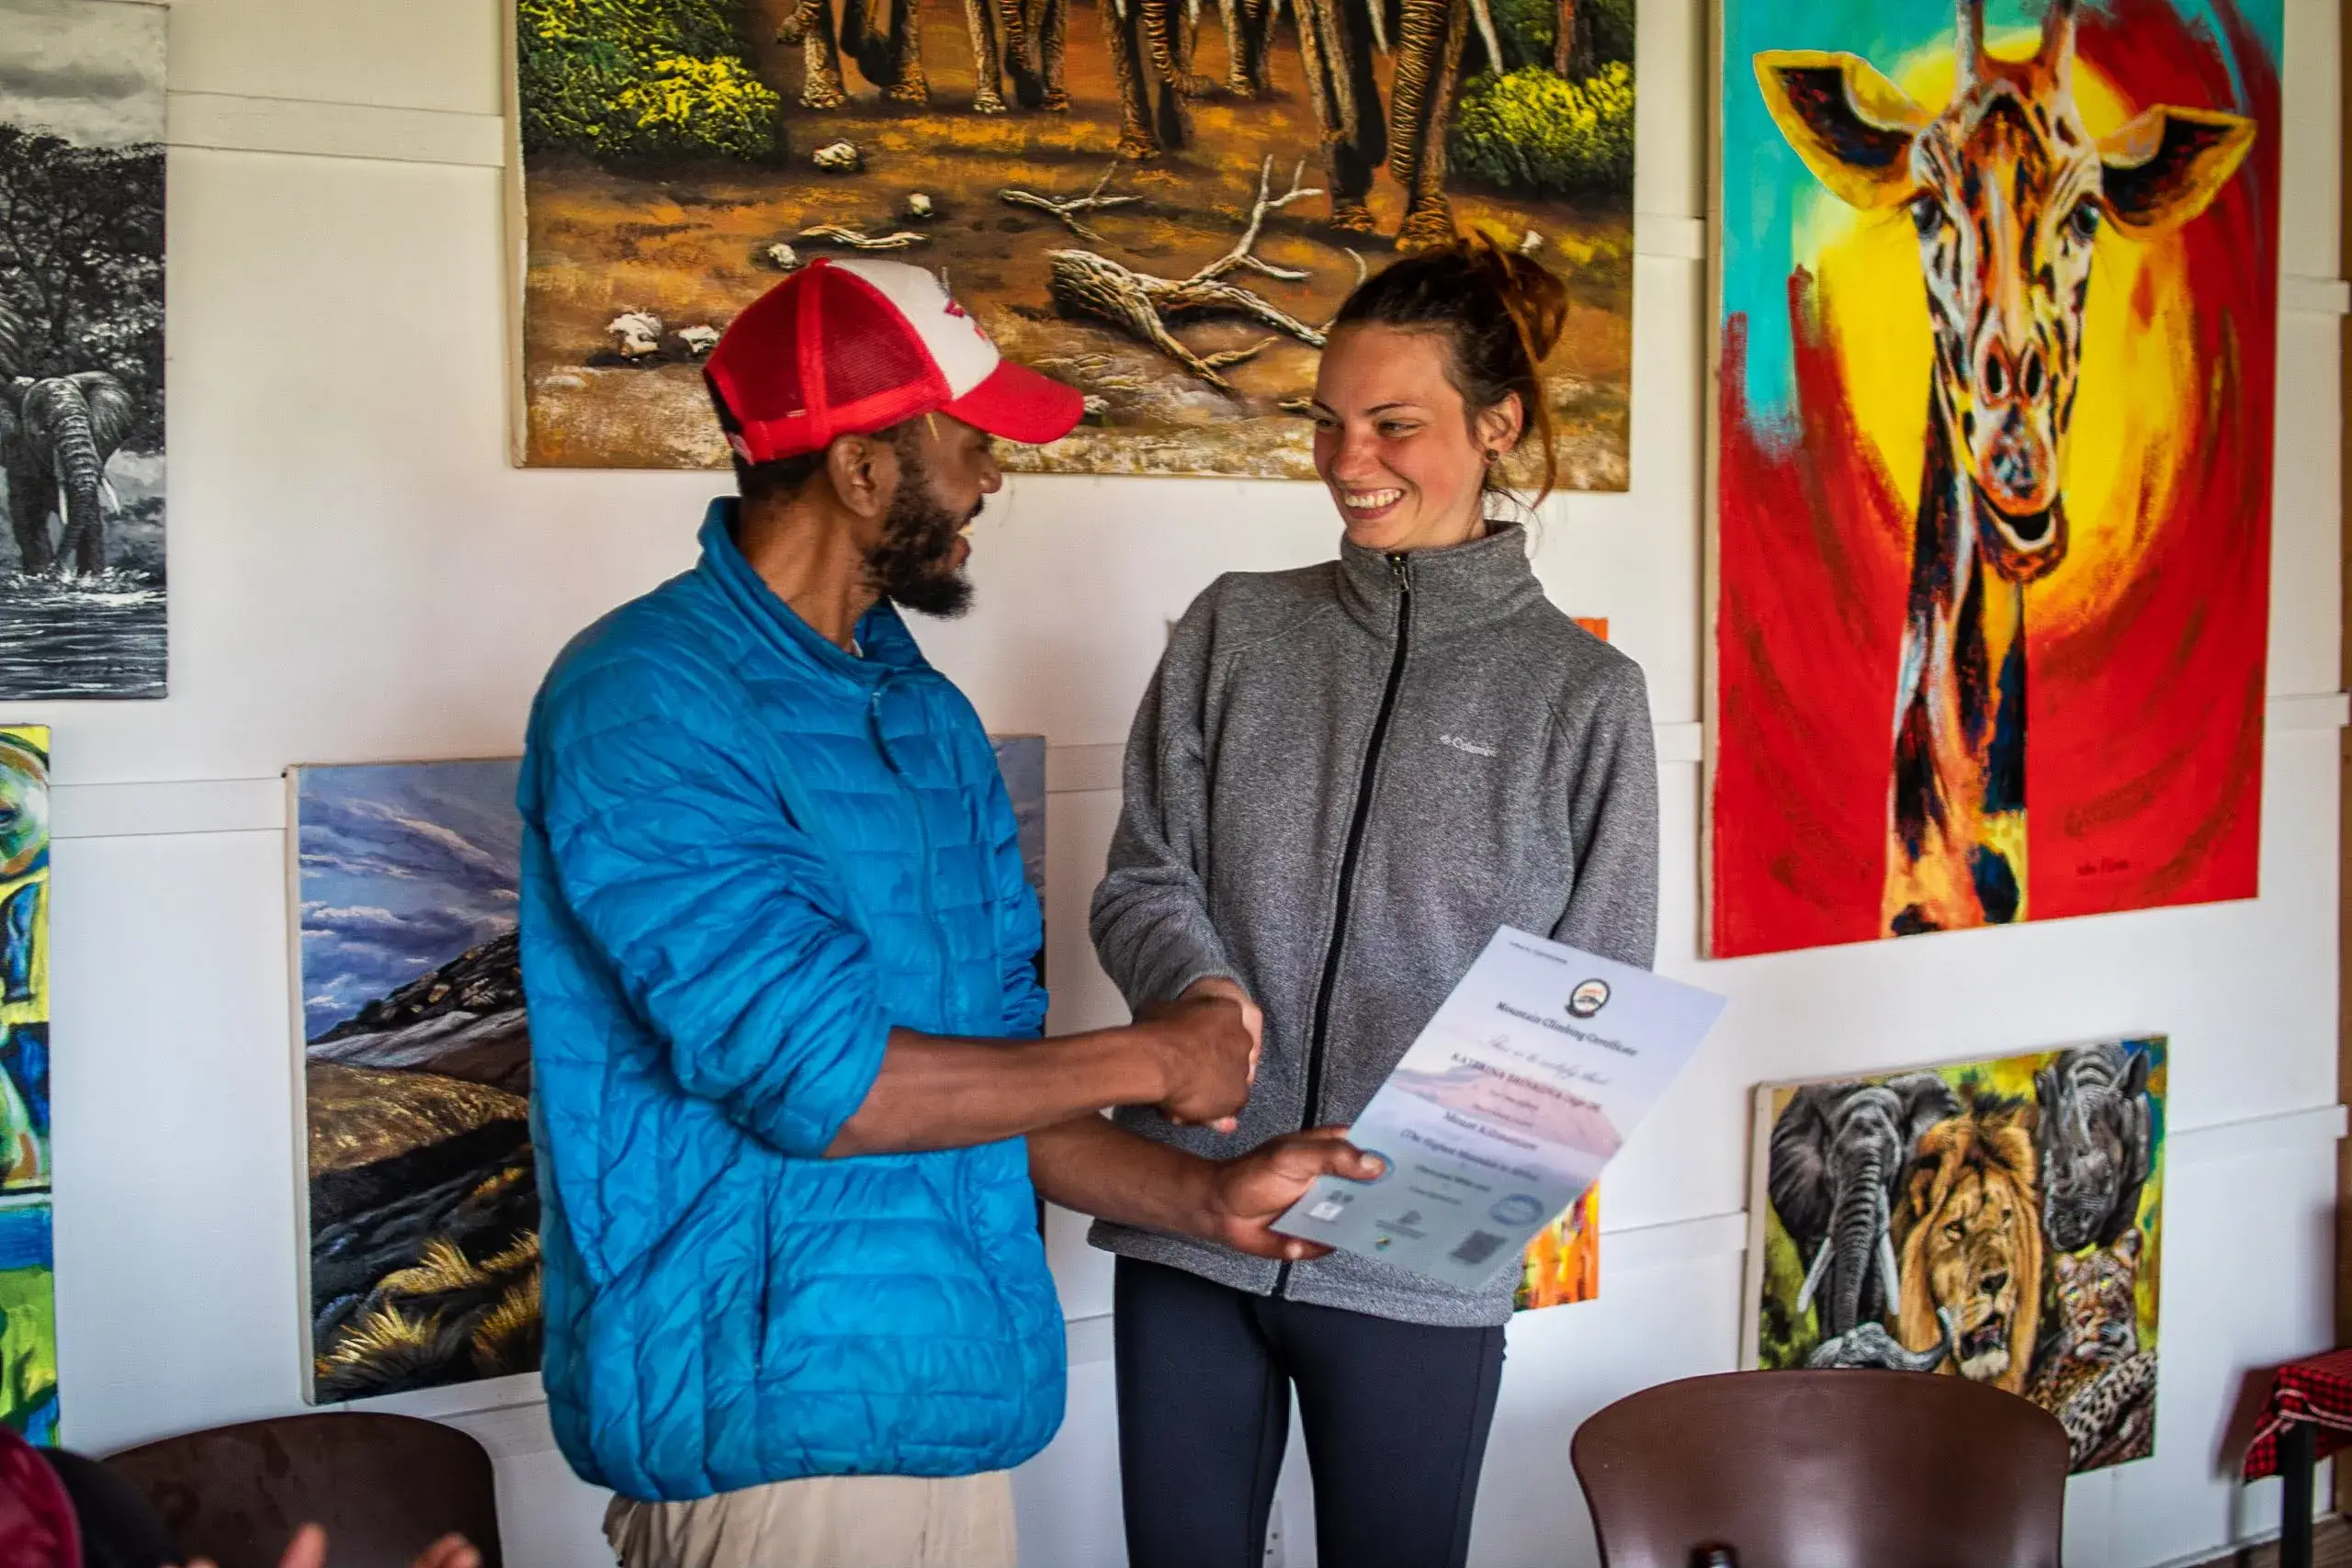 Our travelers, who are a group of friends taking certificates of trekking Kilimanjaro